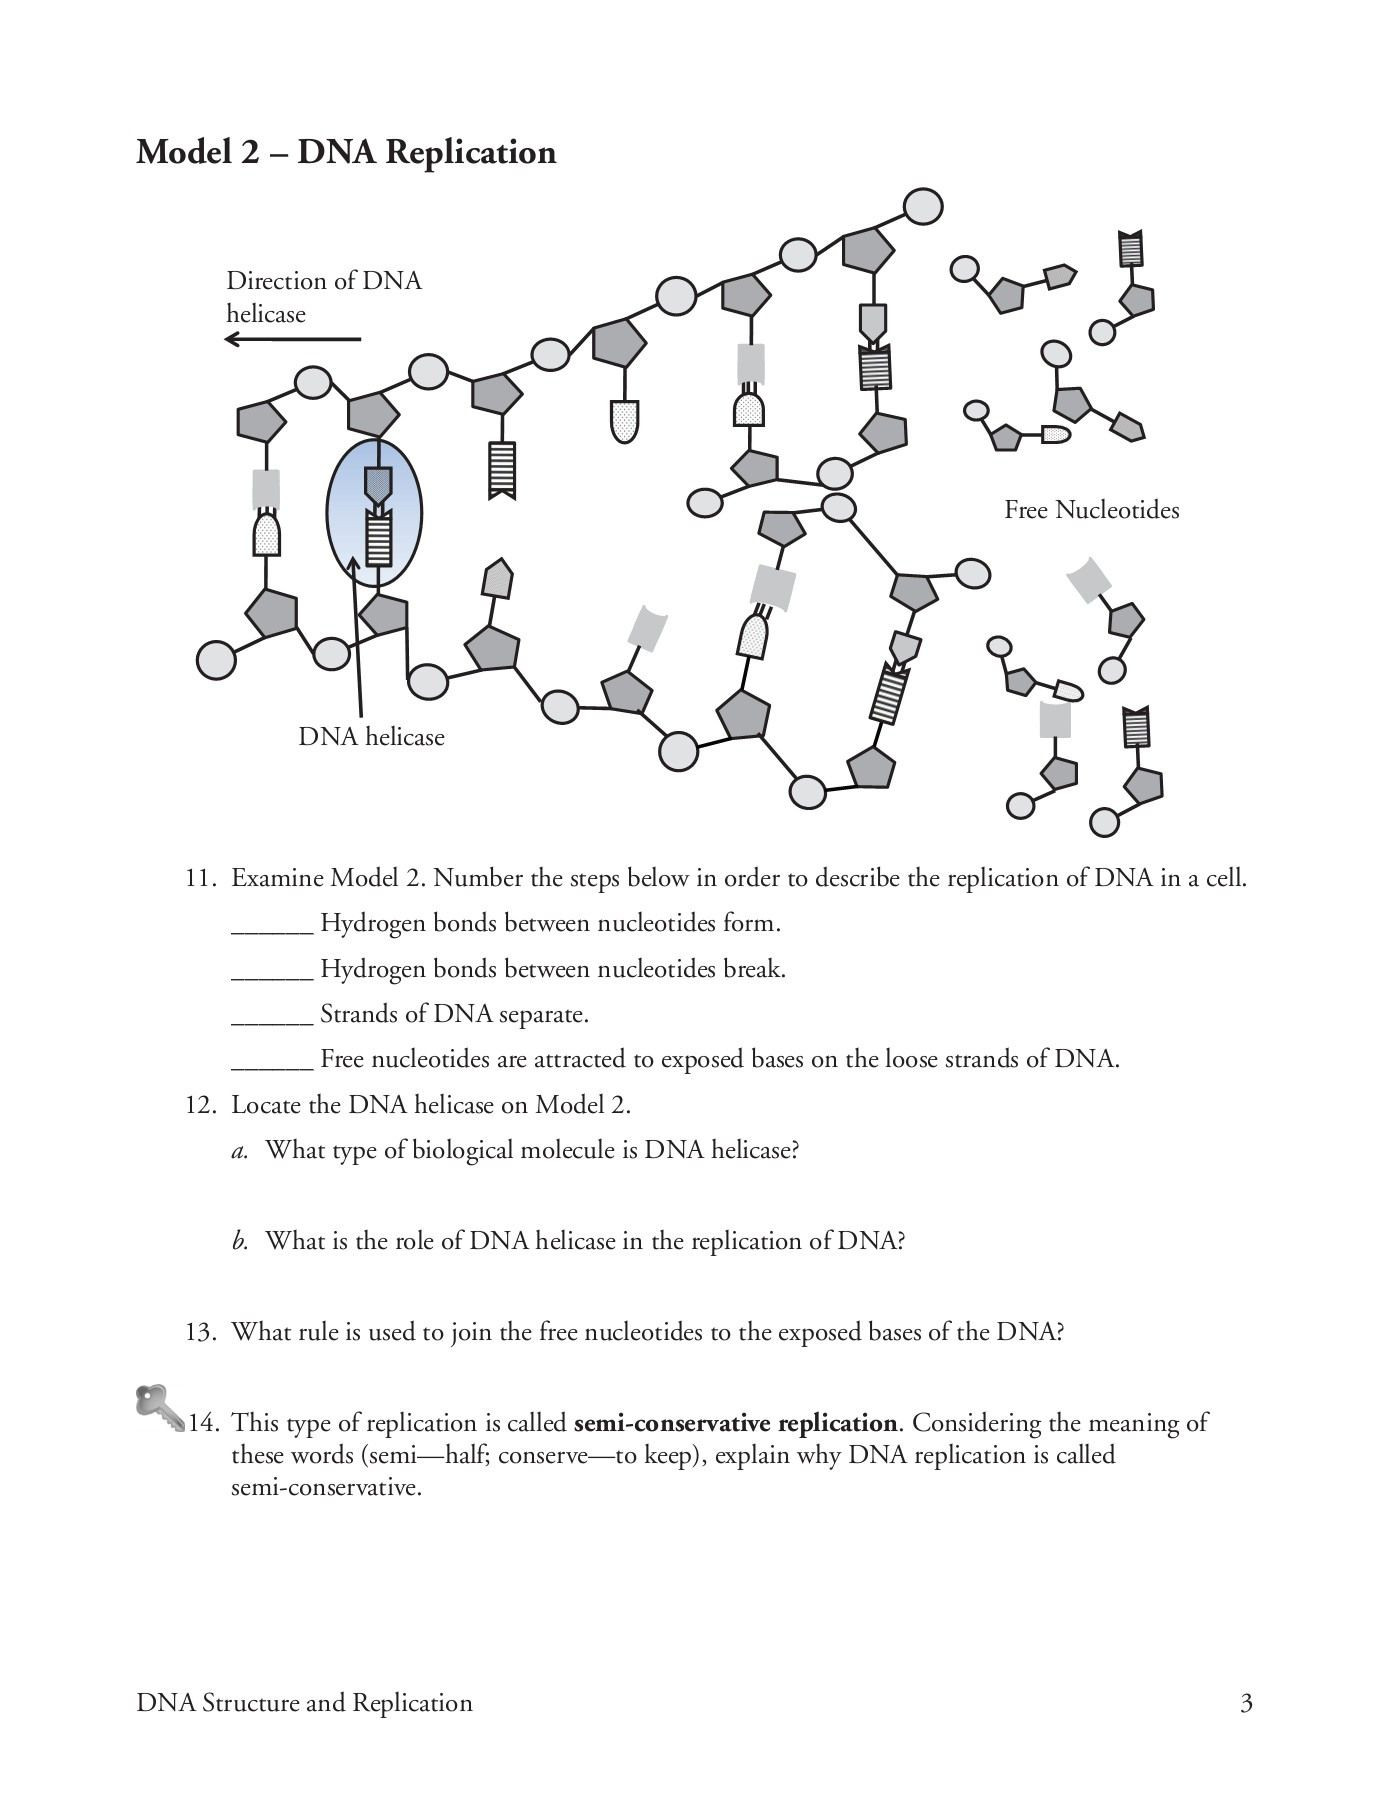 Dna Structure and Replication Worksheet Dna Structure and Replication Worksheet Answer Key